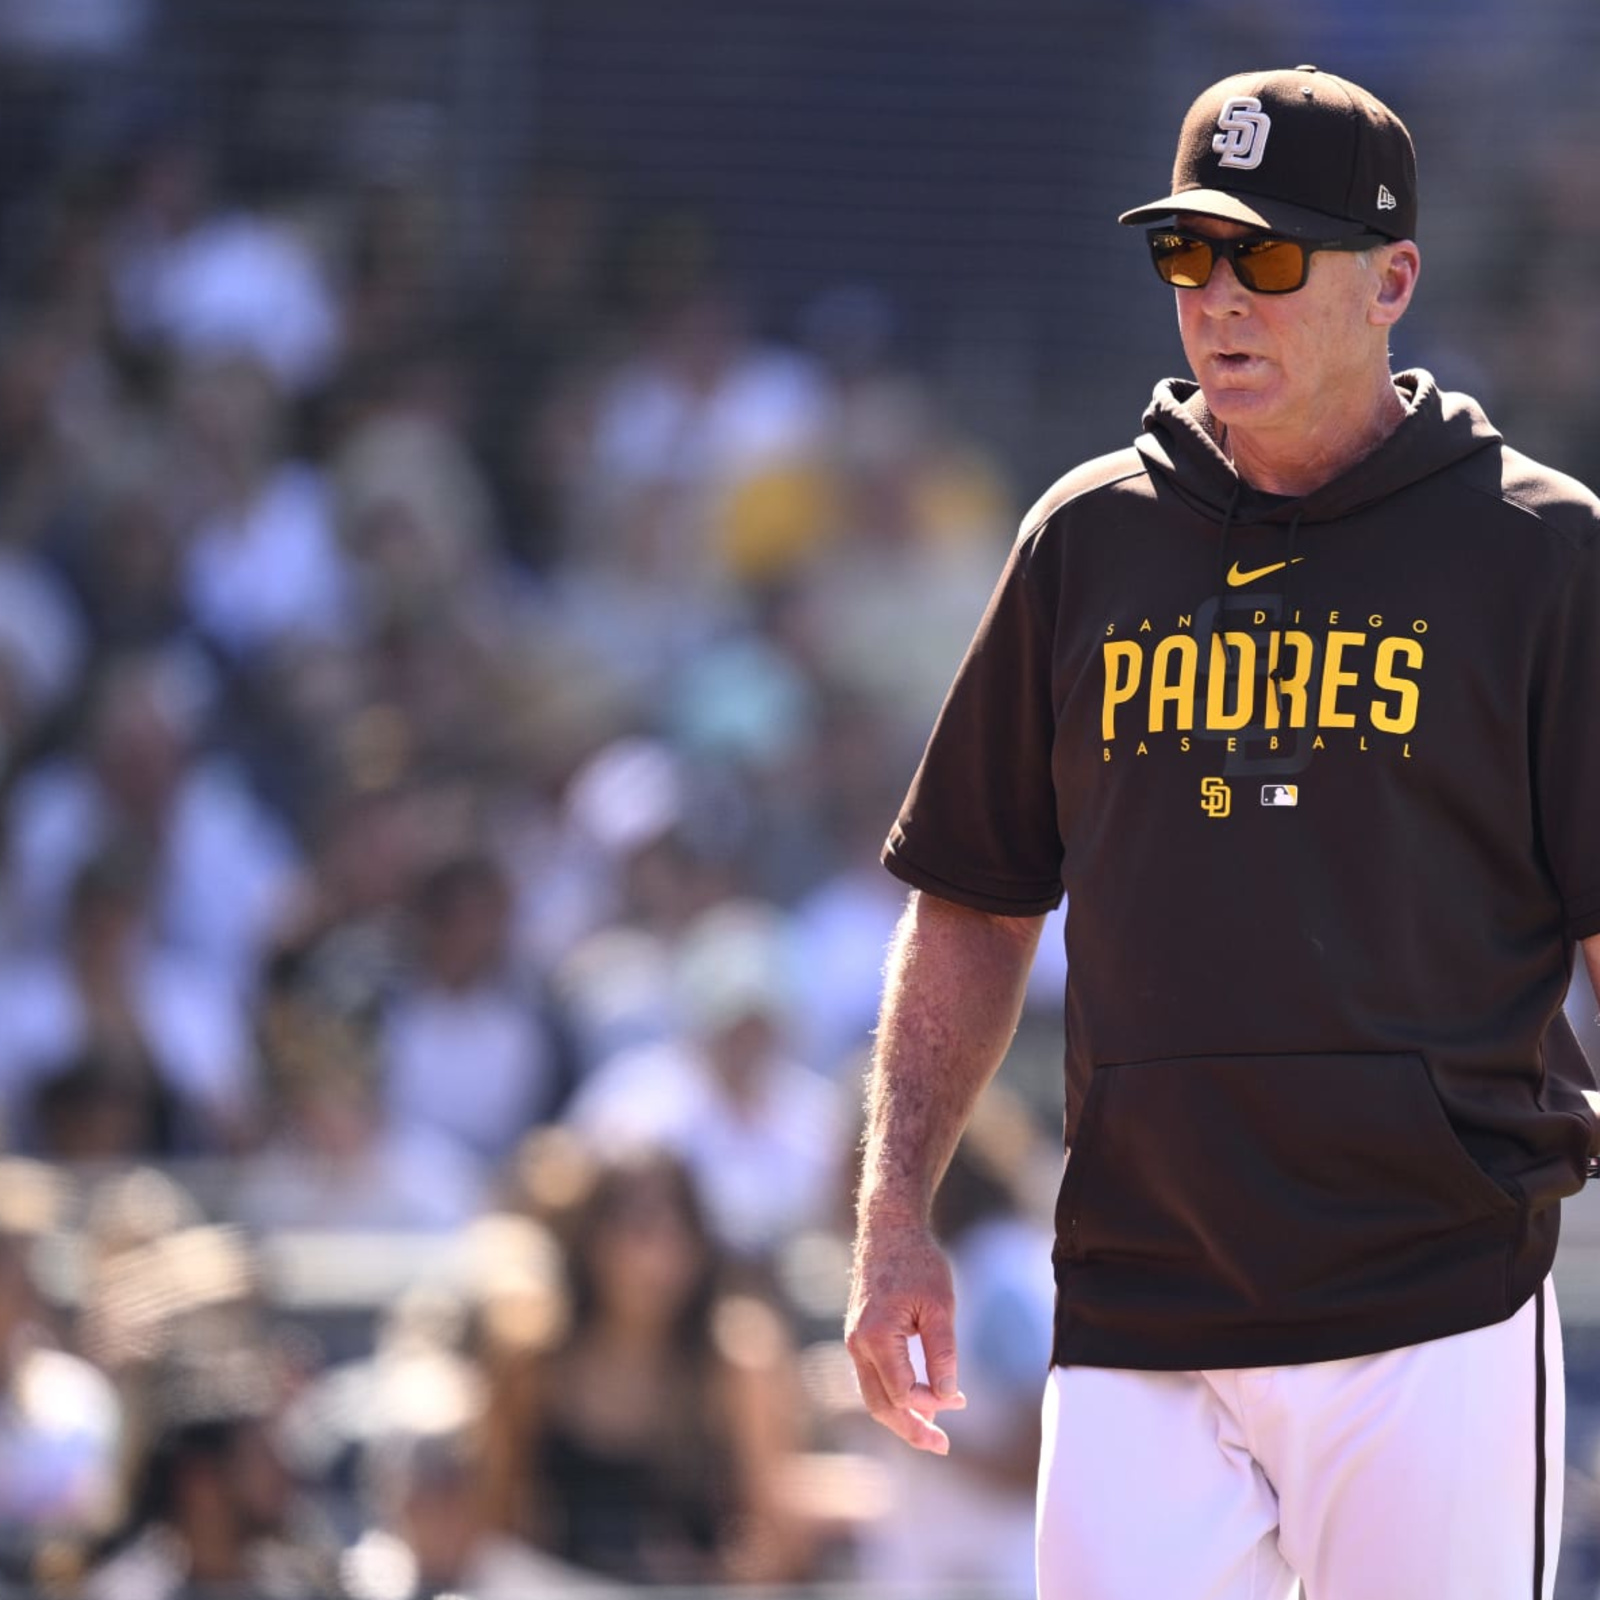 Bob Melvin's pending status hangs over everything as Padres enter